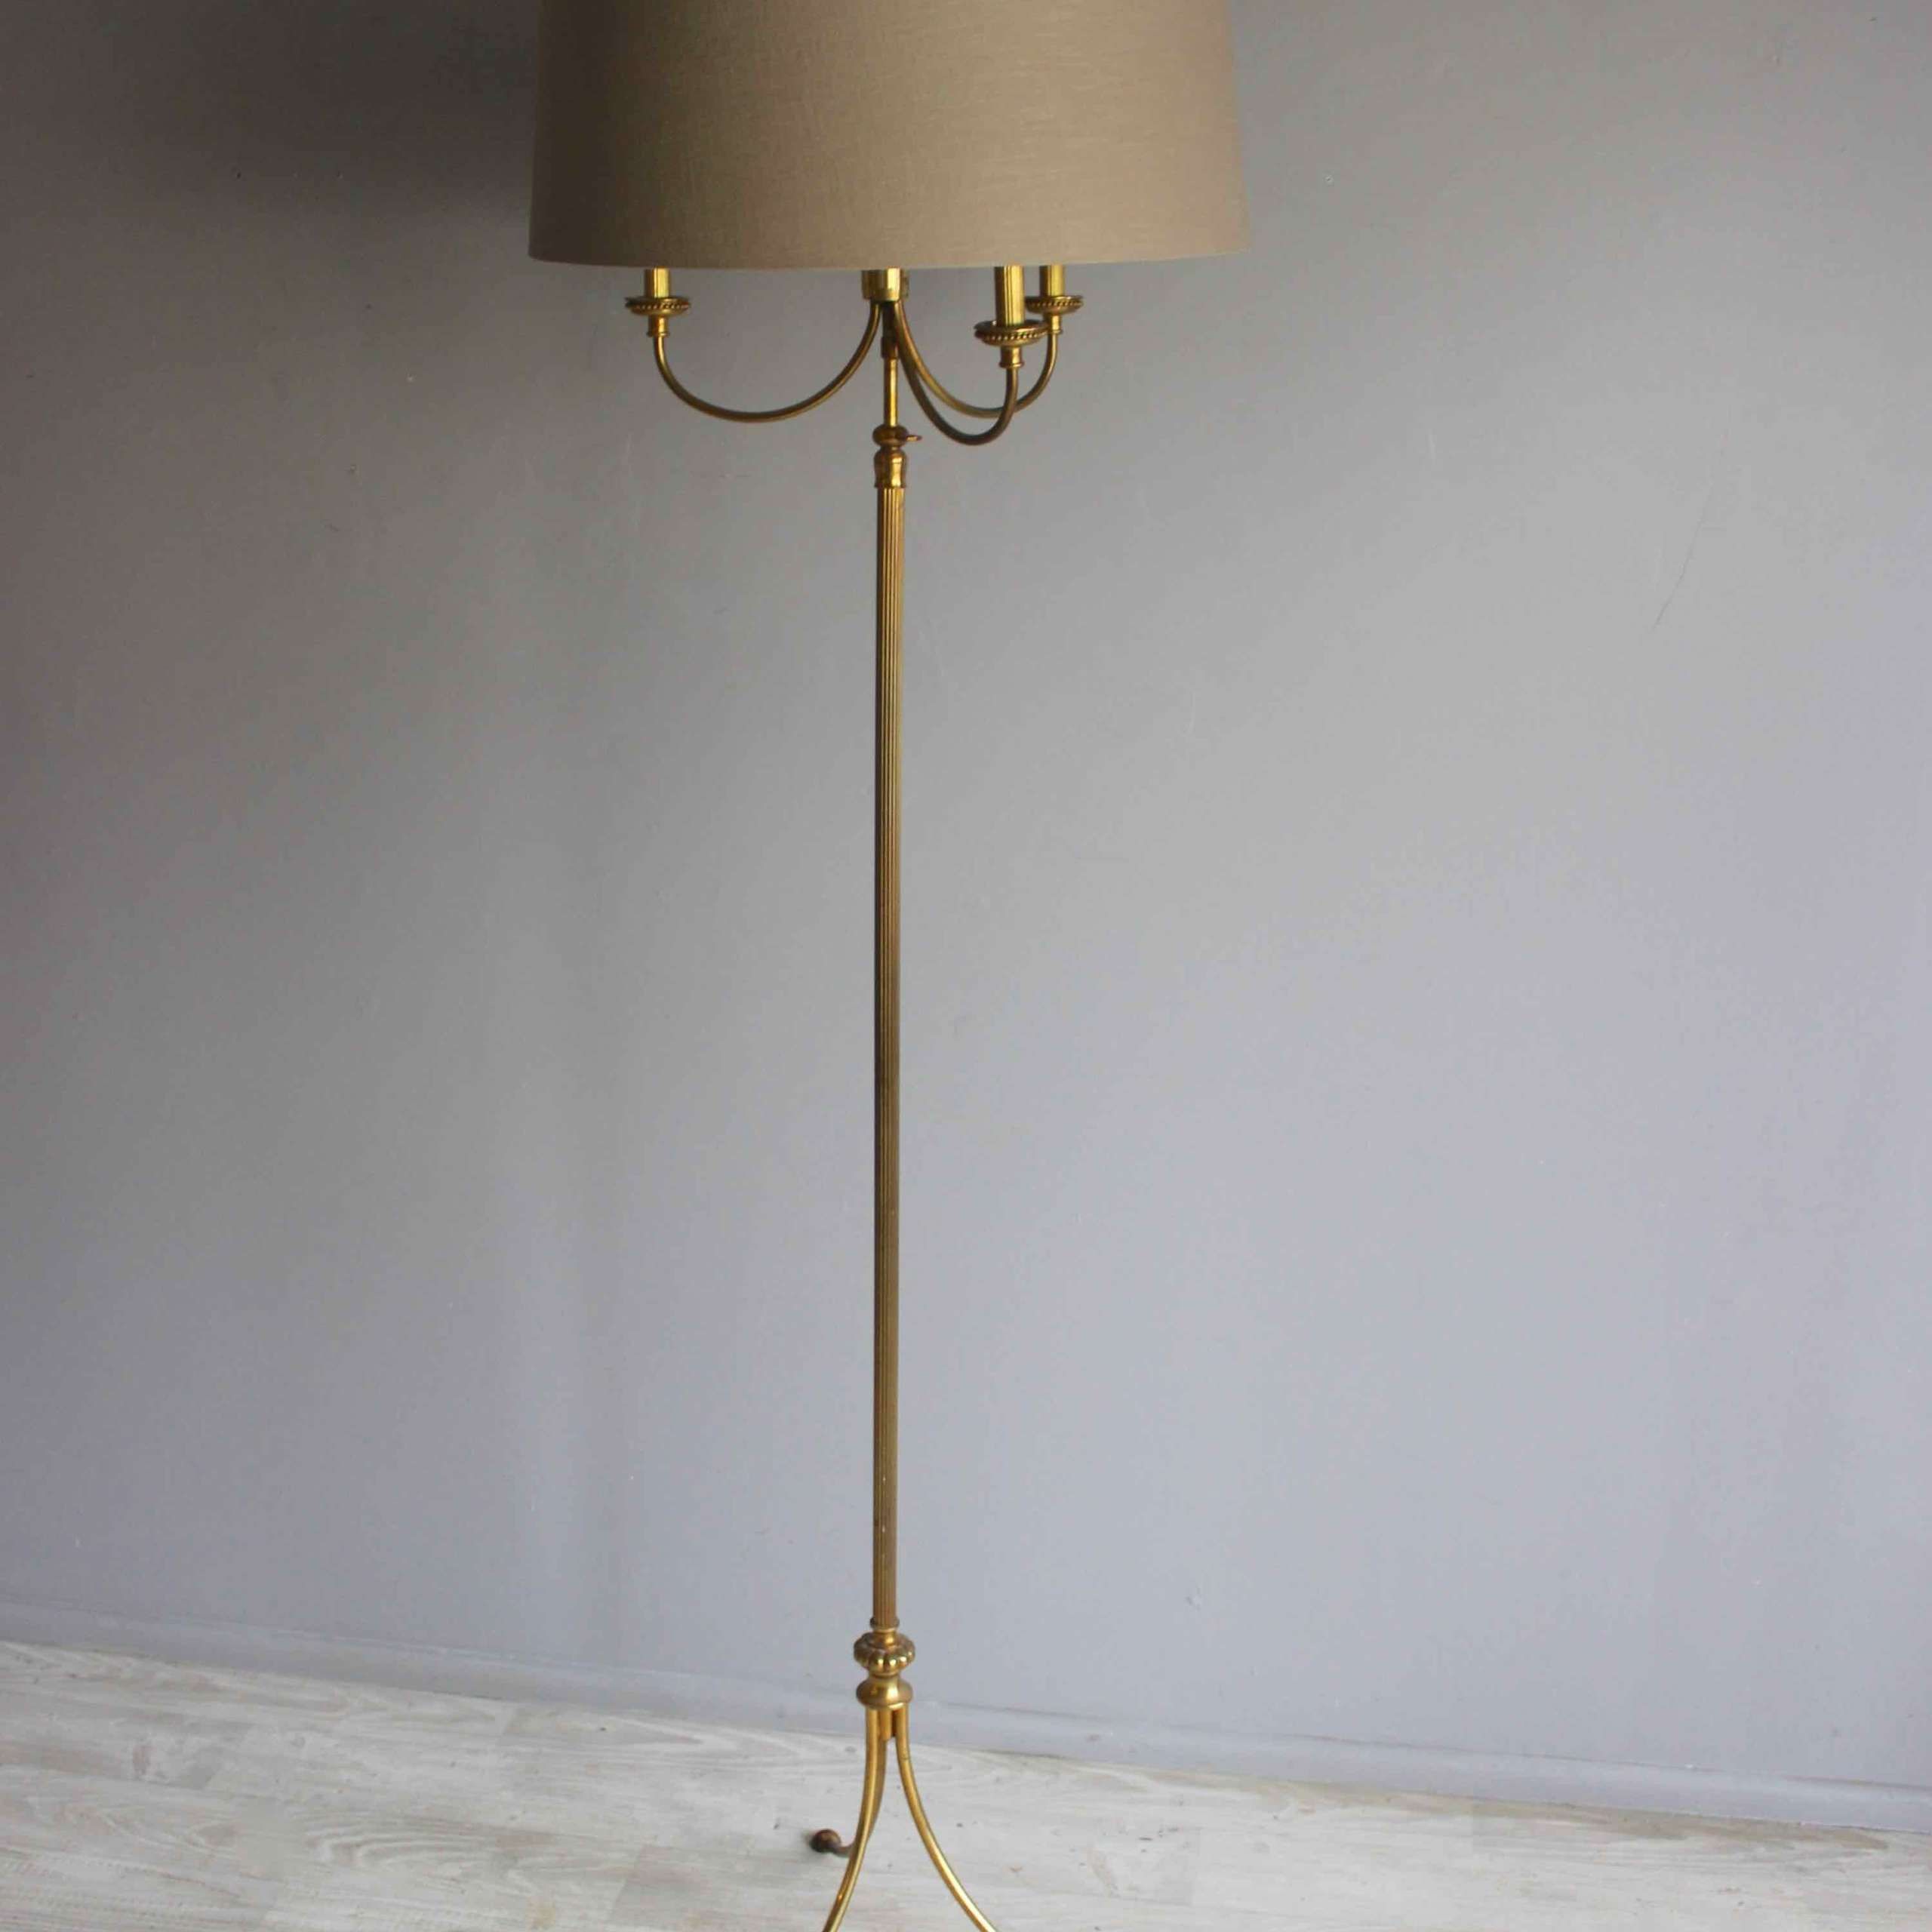 Adjustable Height 3 Branch French Floor Lamp In Antique Floor Lamps Inside Adjustable Height Floor Lamps (View 14 of 15)